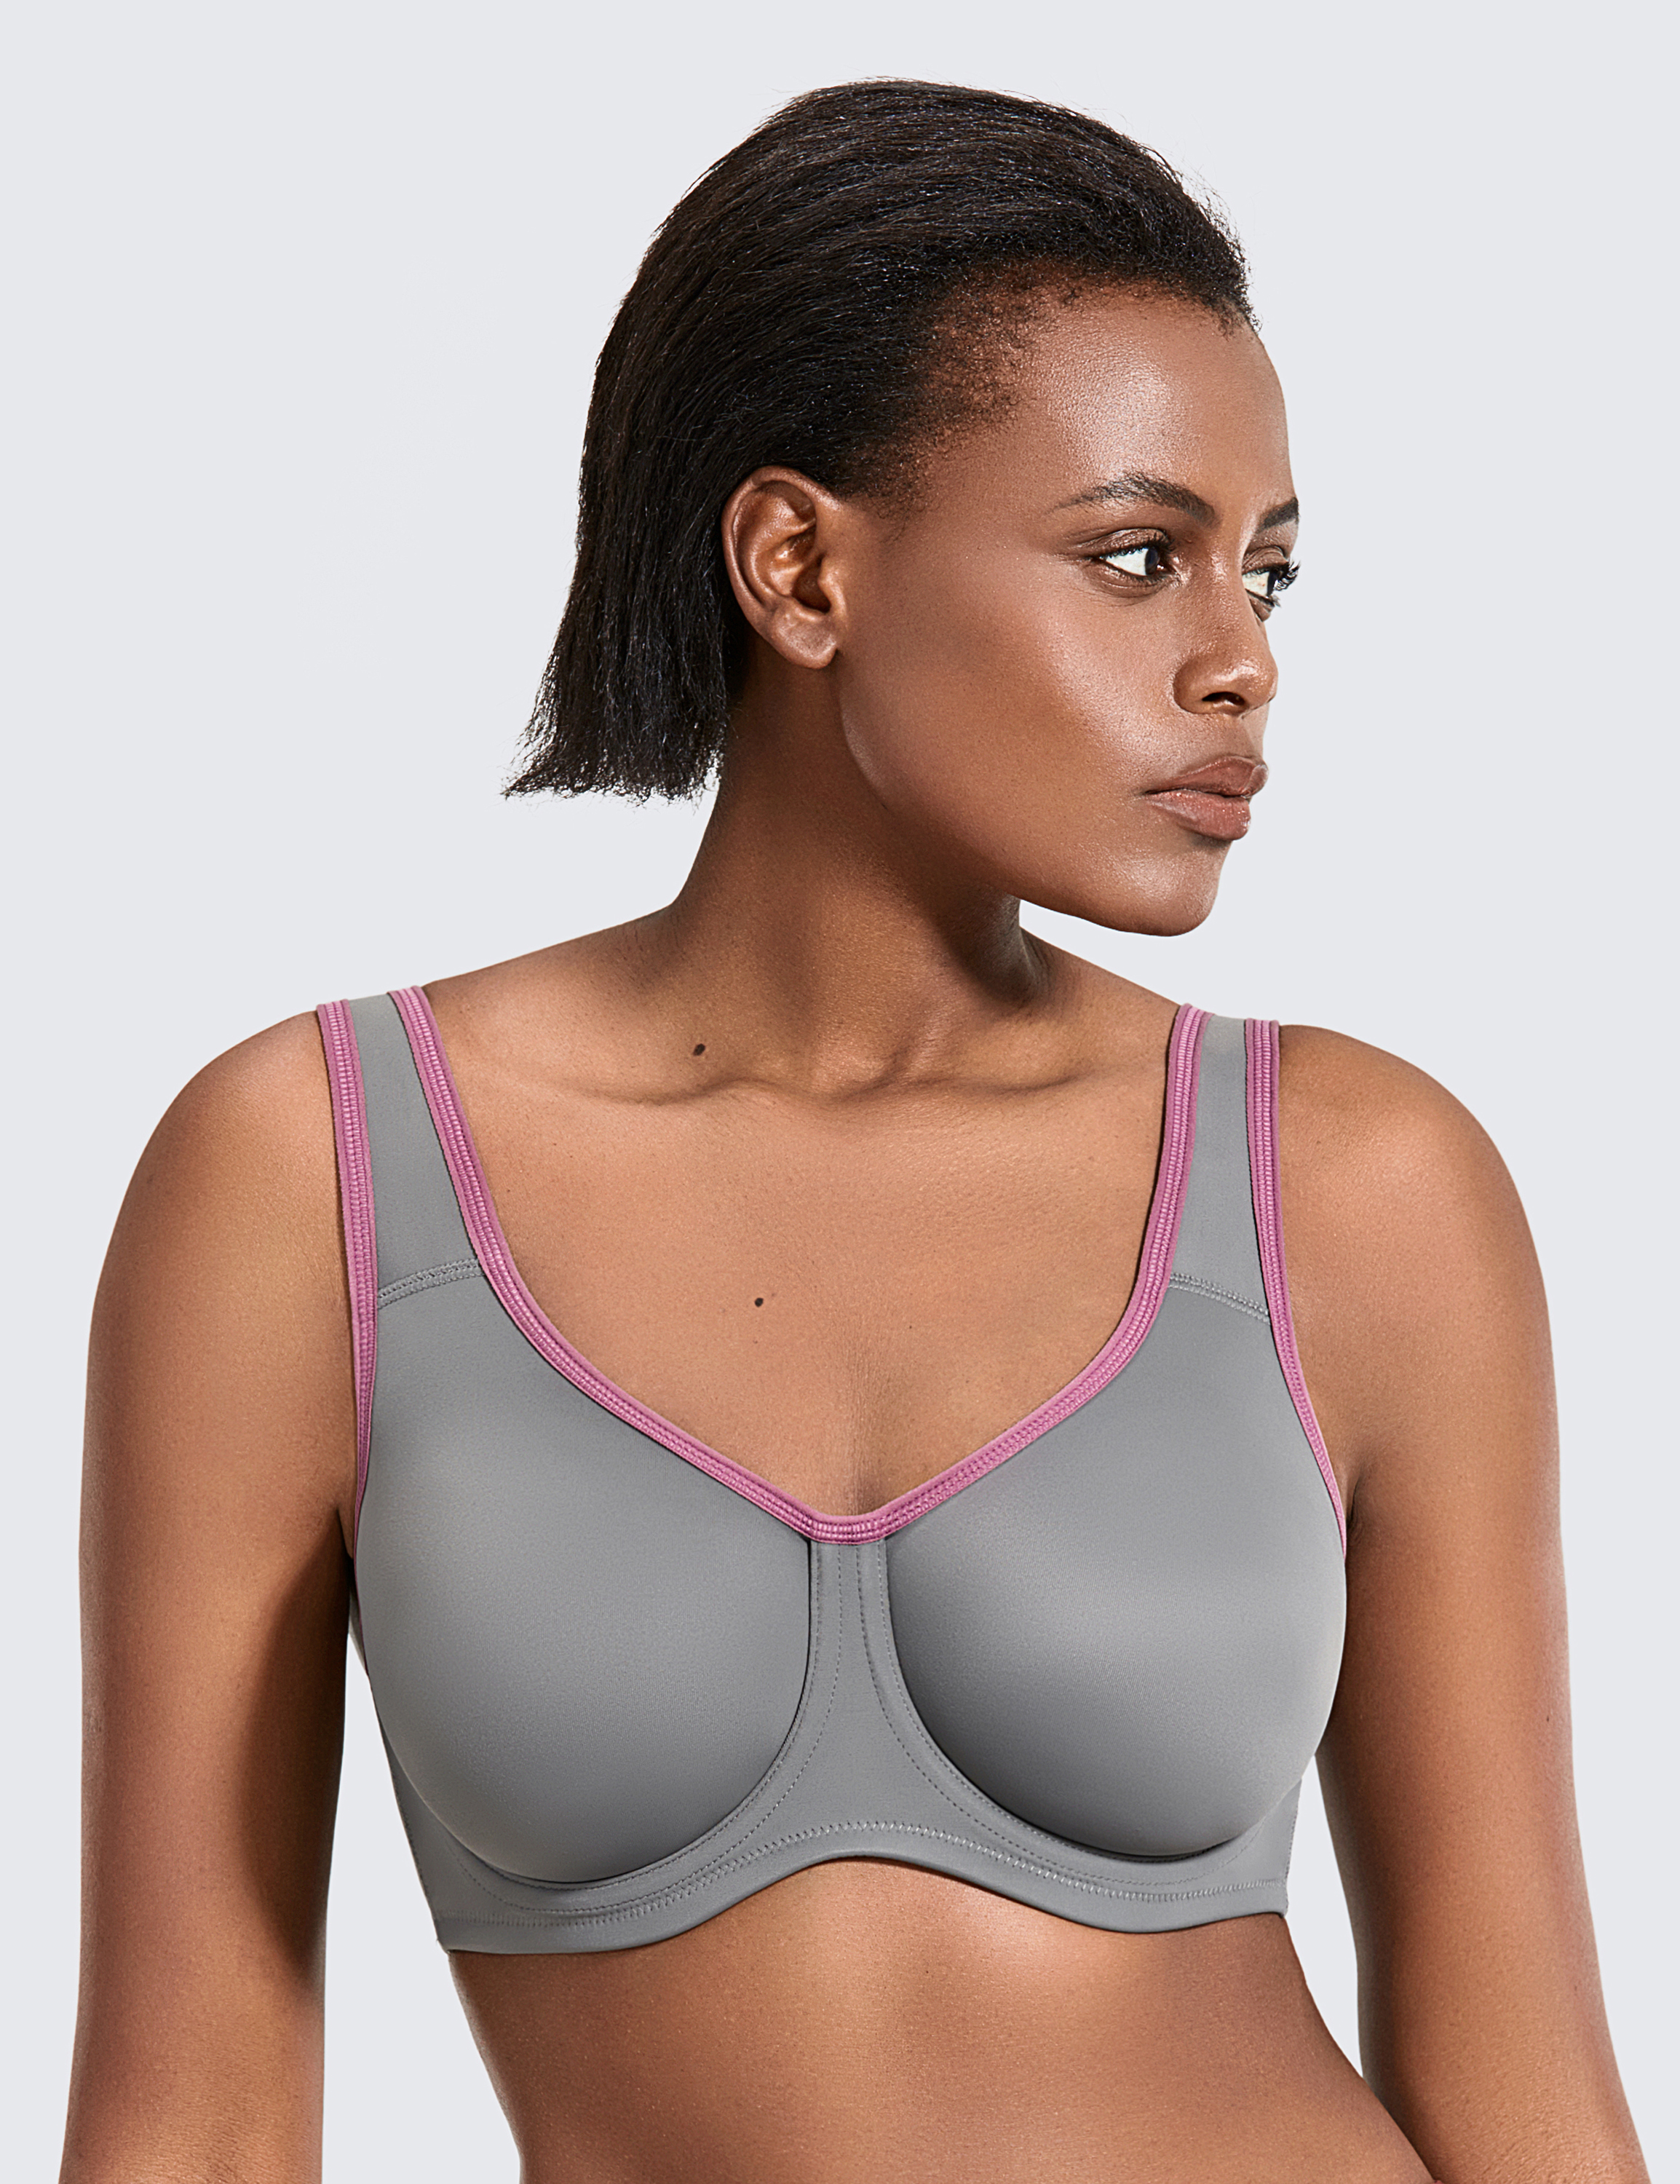 SYROKAN Women's Max Control Solid Plus Size High Impact Underwire